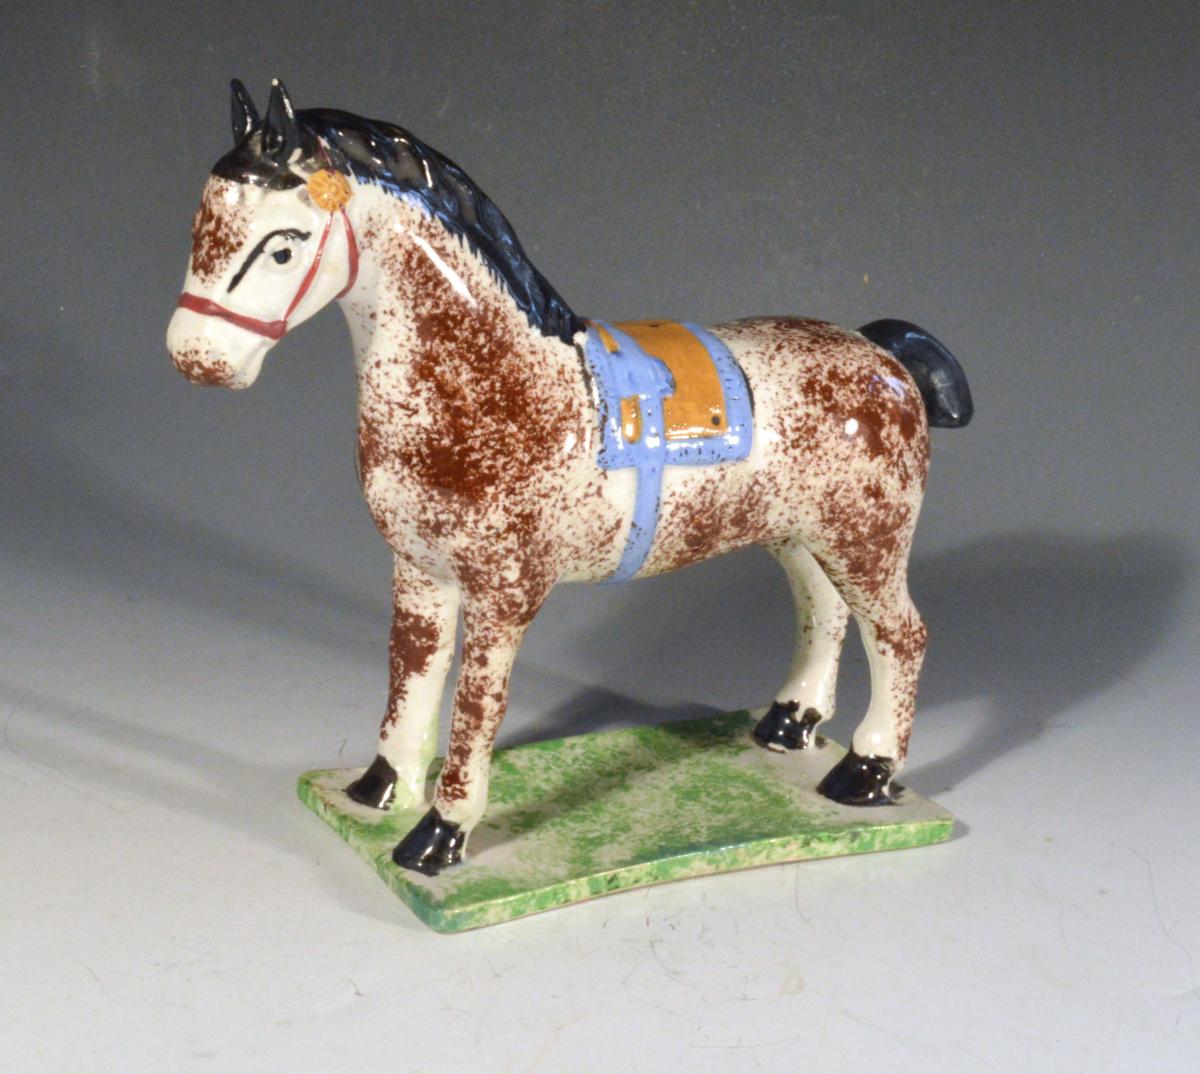 Newcastle Prattware Pottery Model of a Horse, Attributed to St. Anthony Pottery, Newcastle upon Tyne. Circa 1800-20.